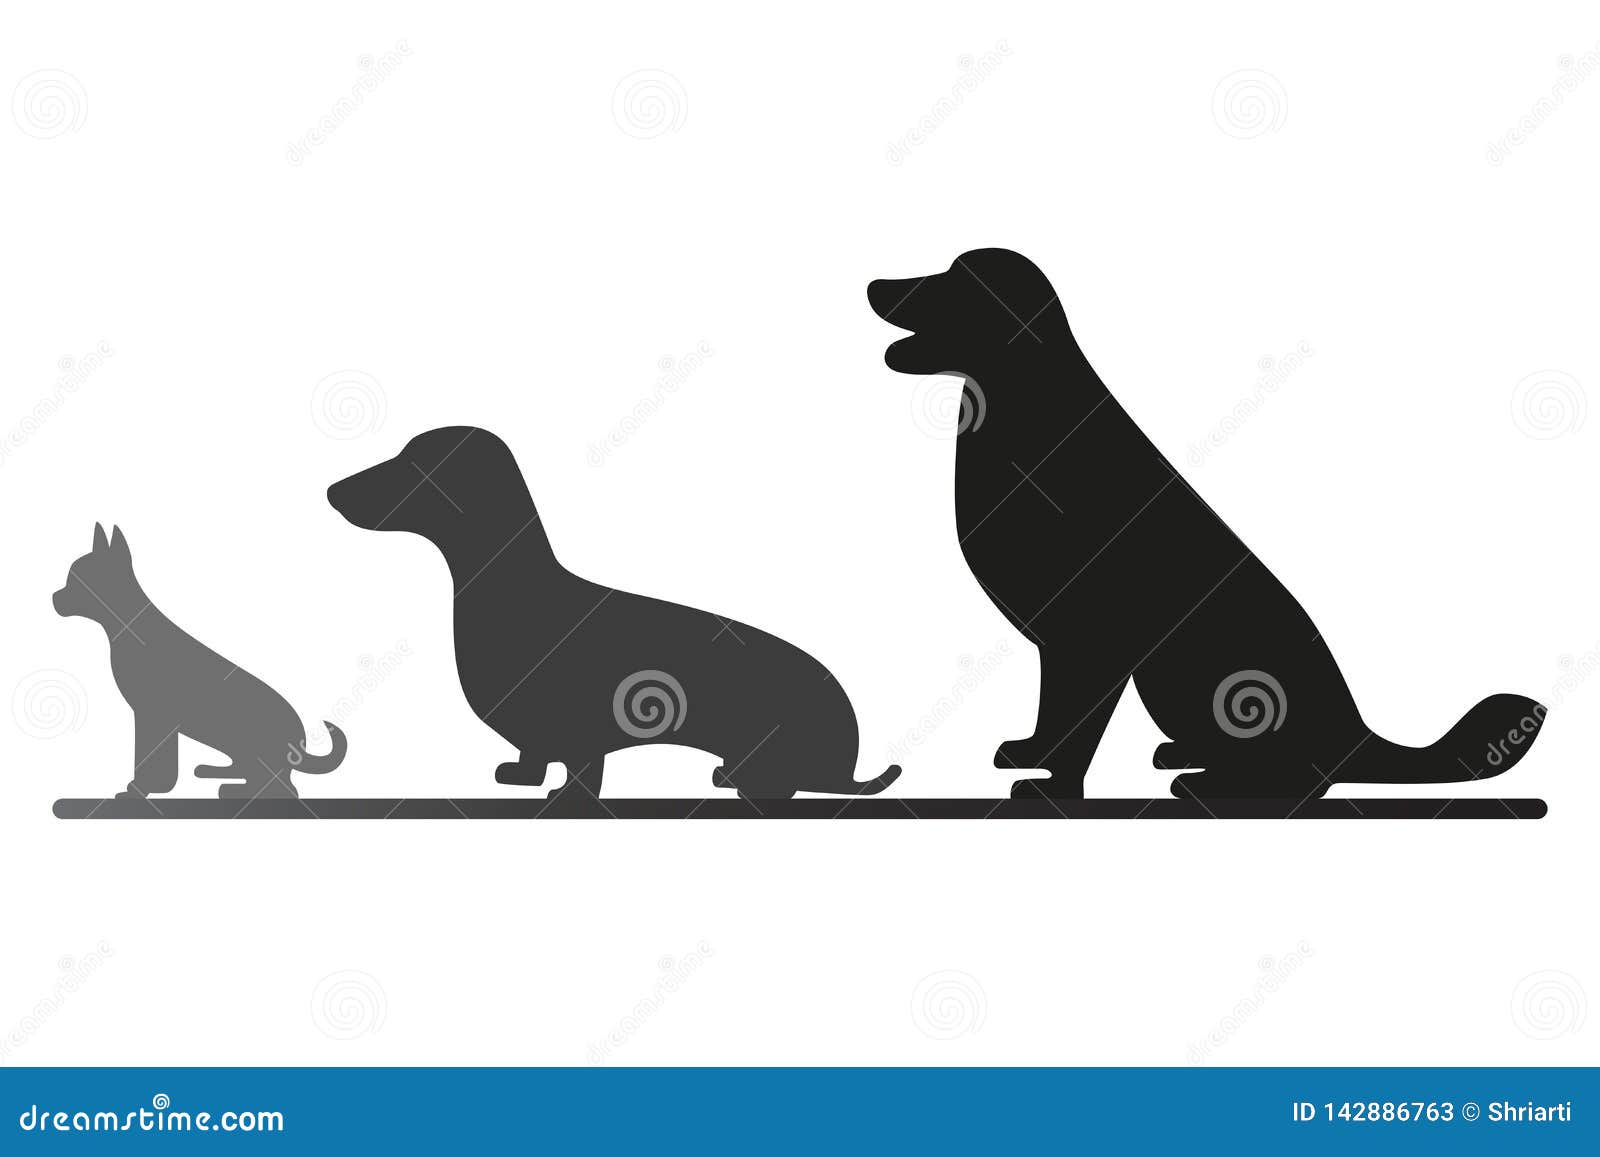 Three Sitting Dogs Behind Each Other. Stock Vector - Illustration of